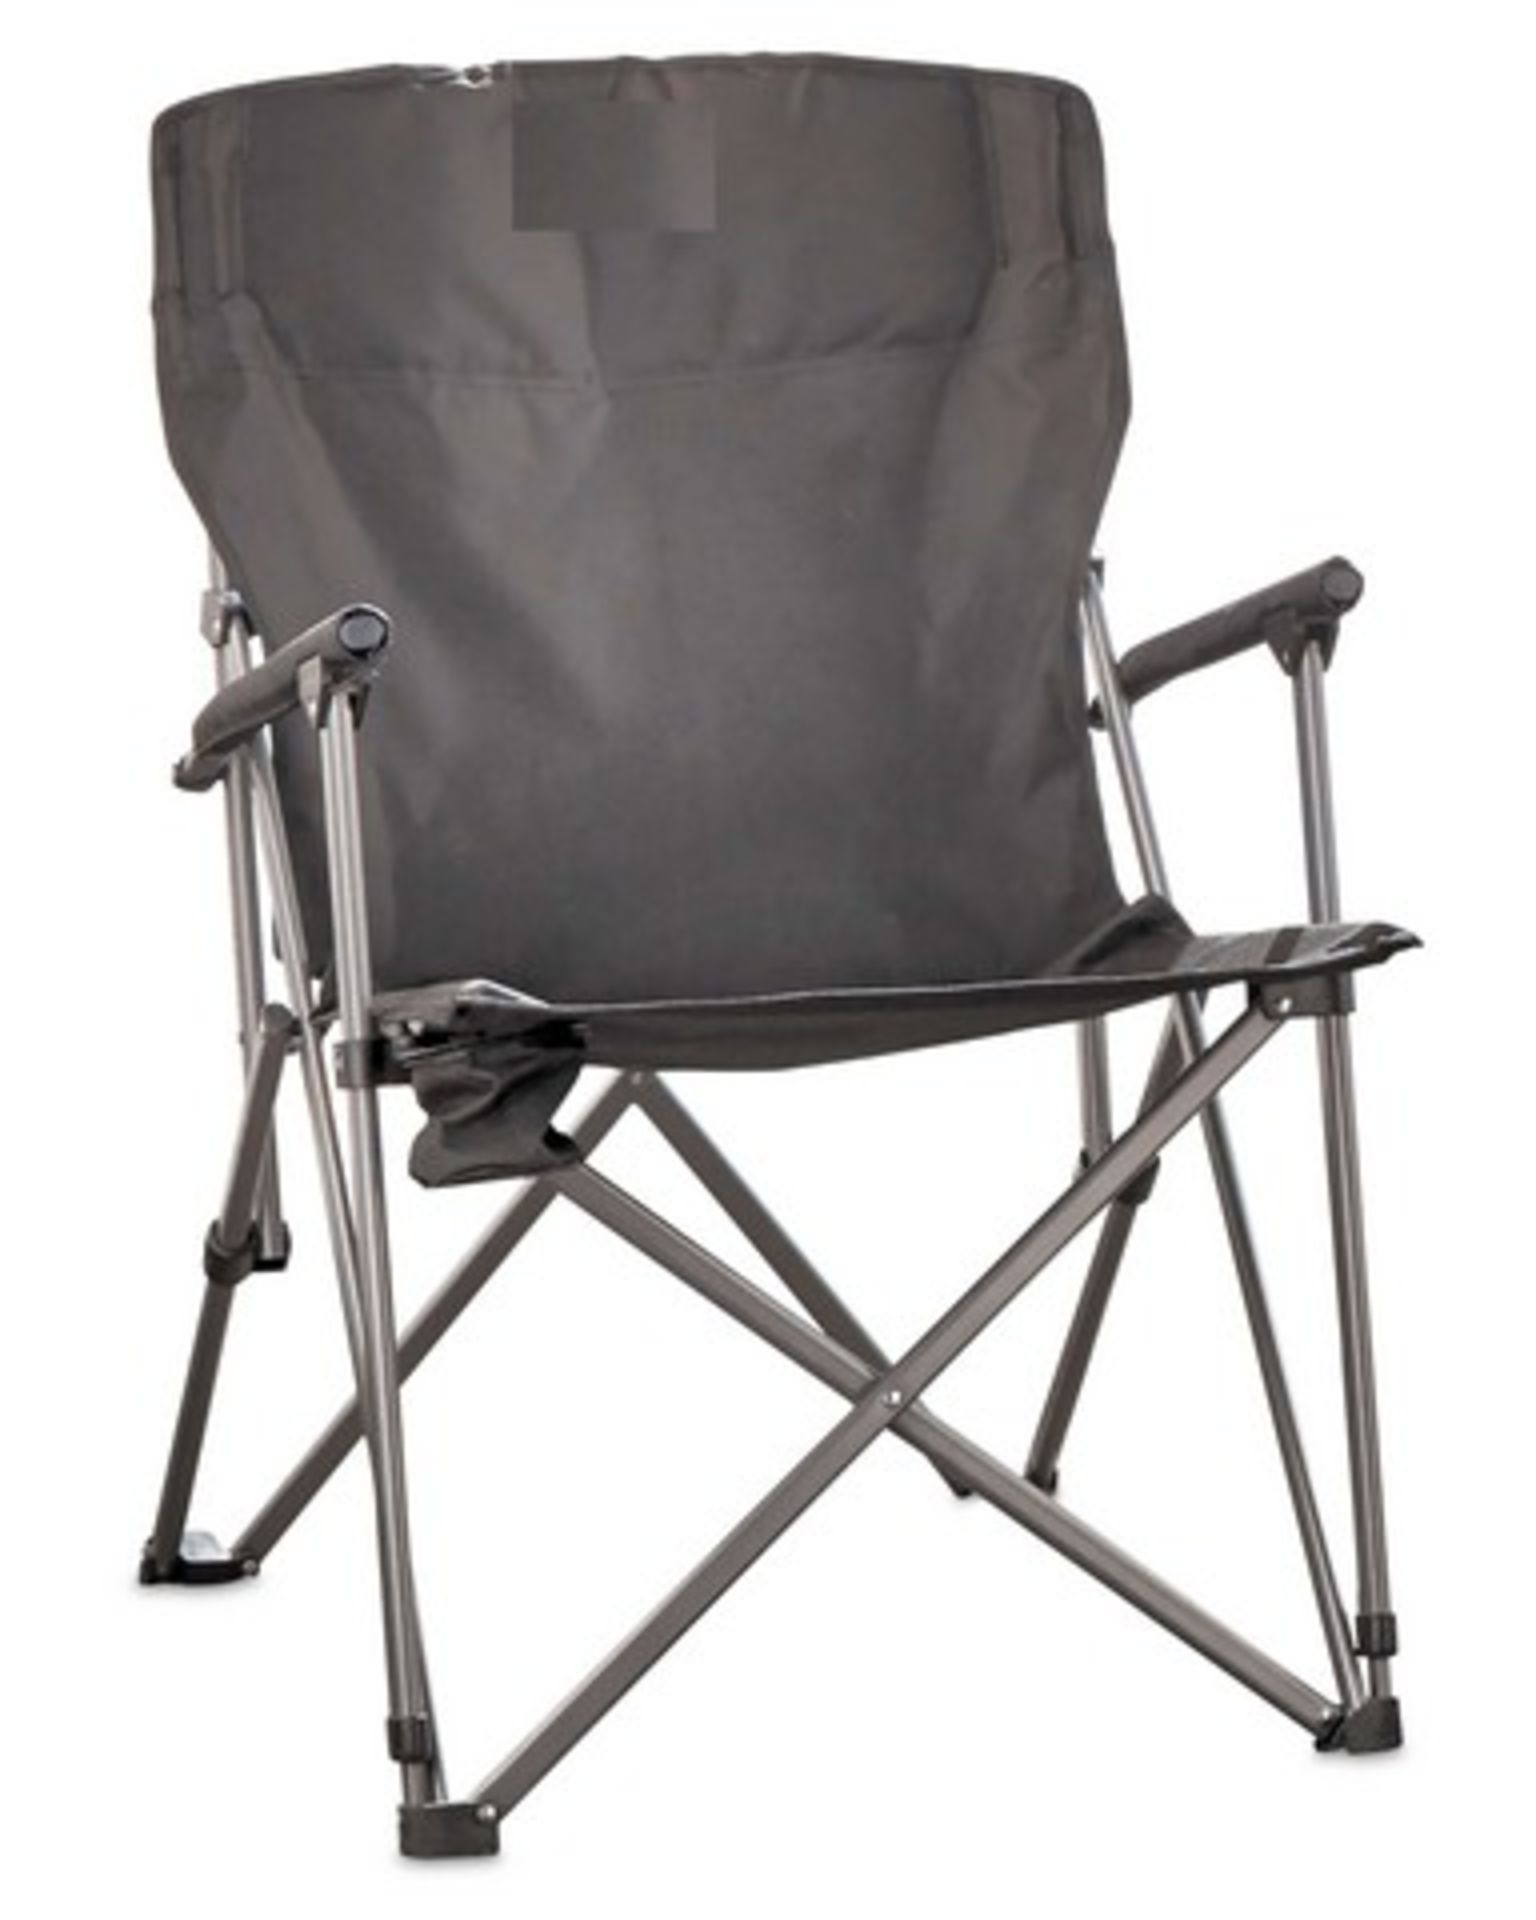 V Brand New Tourer/Expedition Chair In Silver/Black With Carry Case - Lightweight Steel Frame